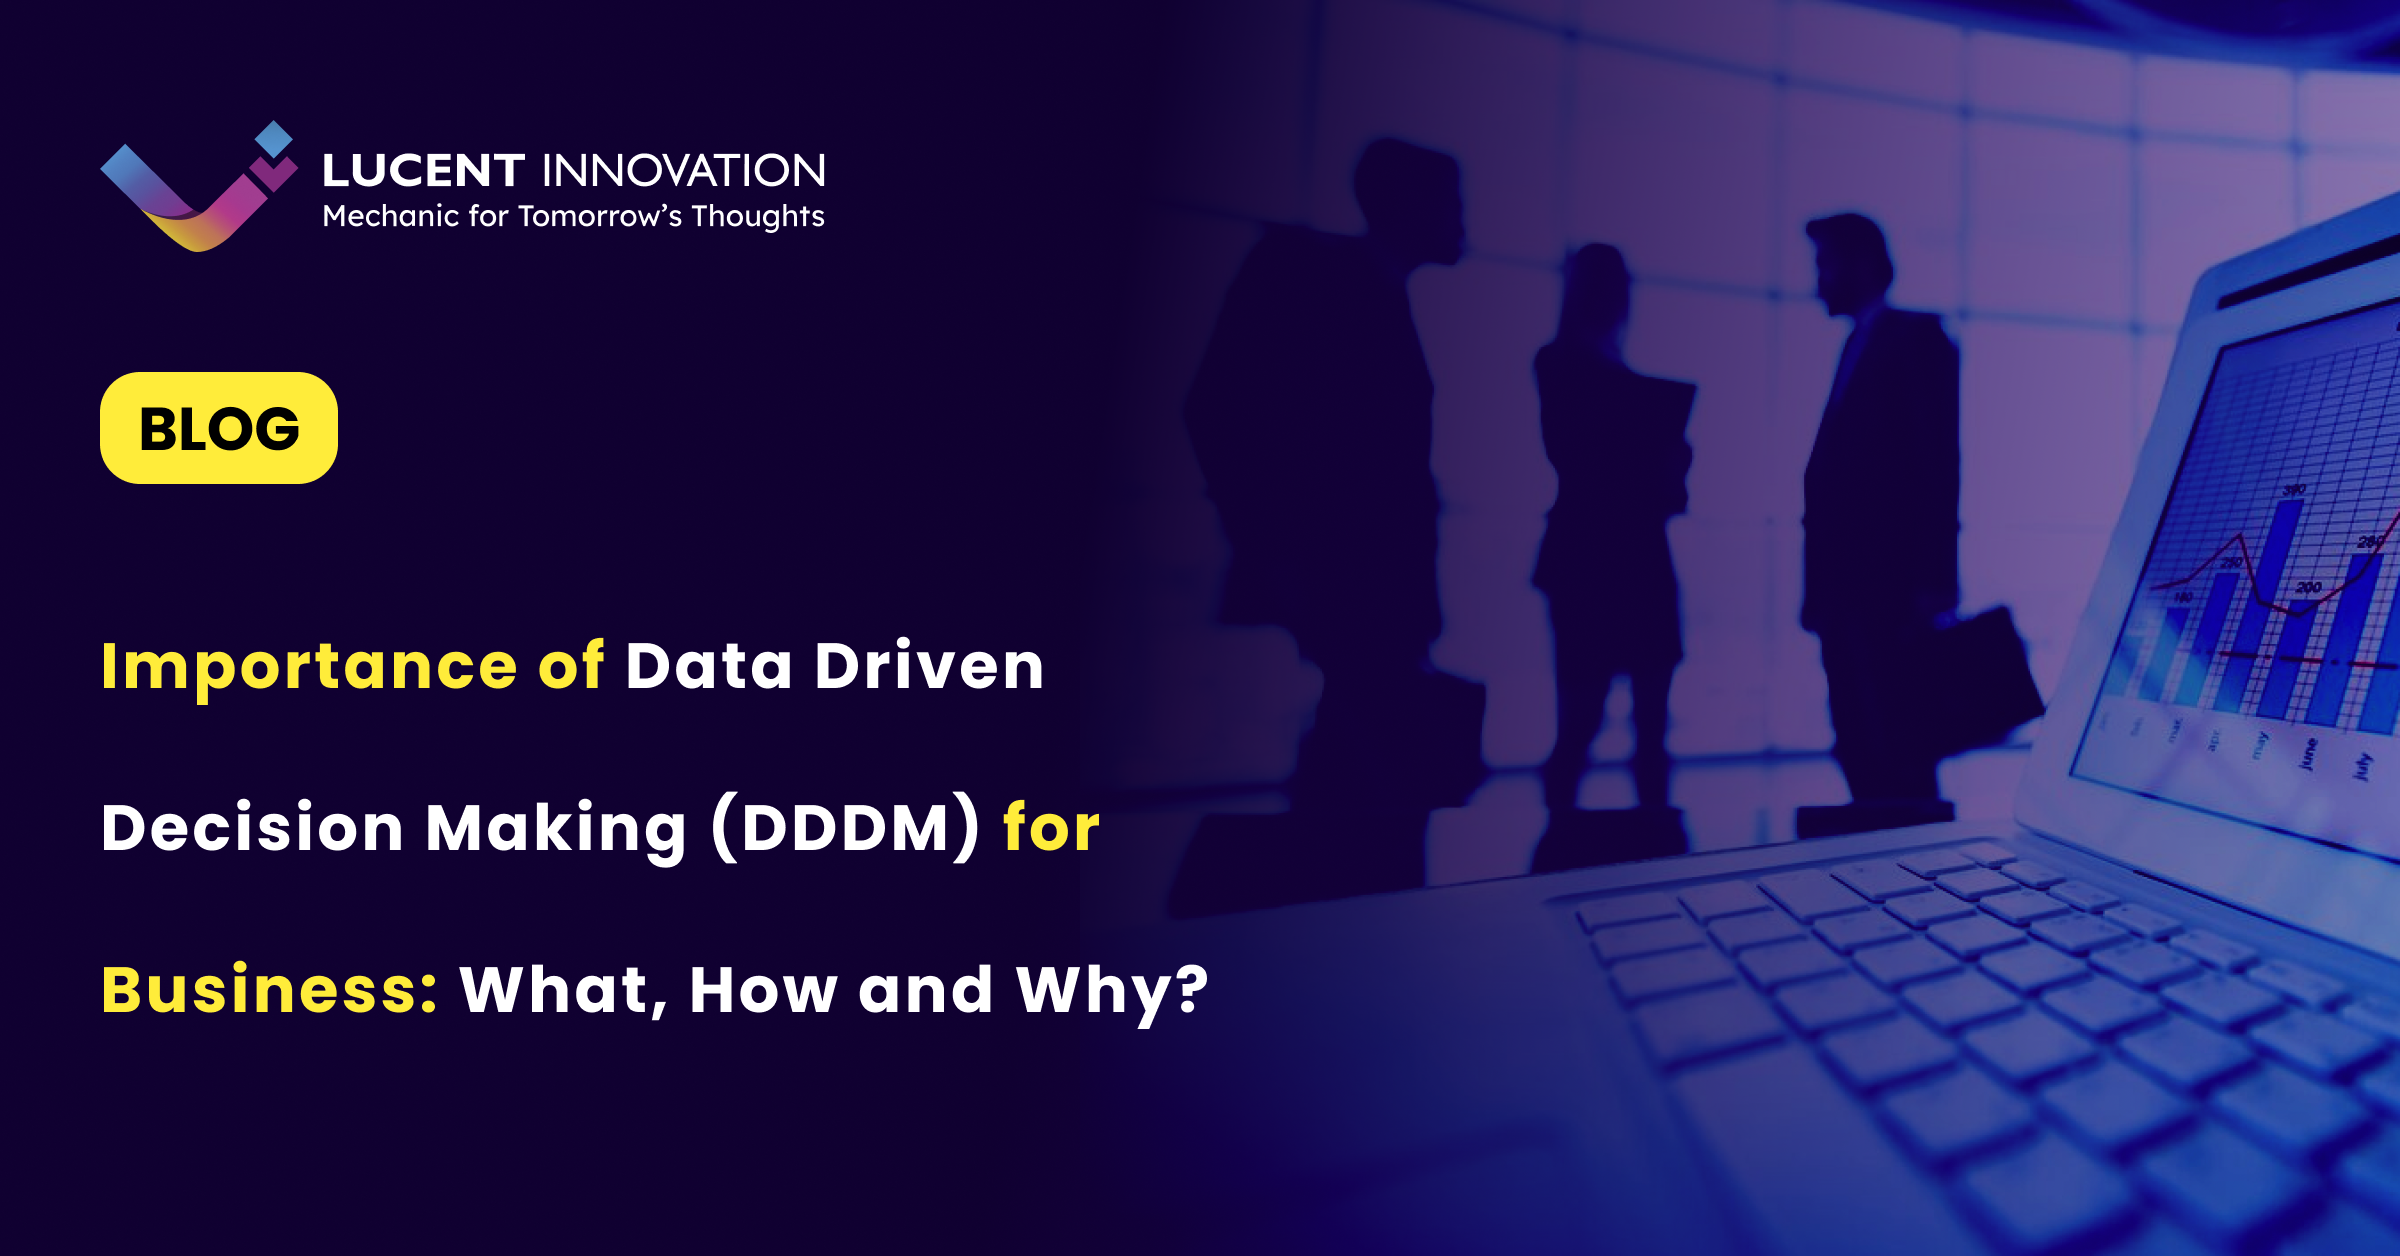 What is Data Driven Decision Making for Businesses?